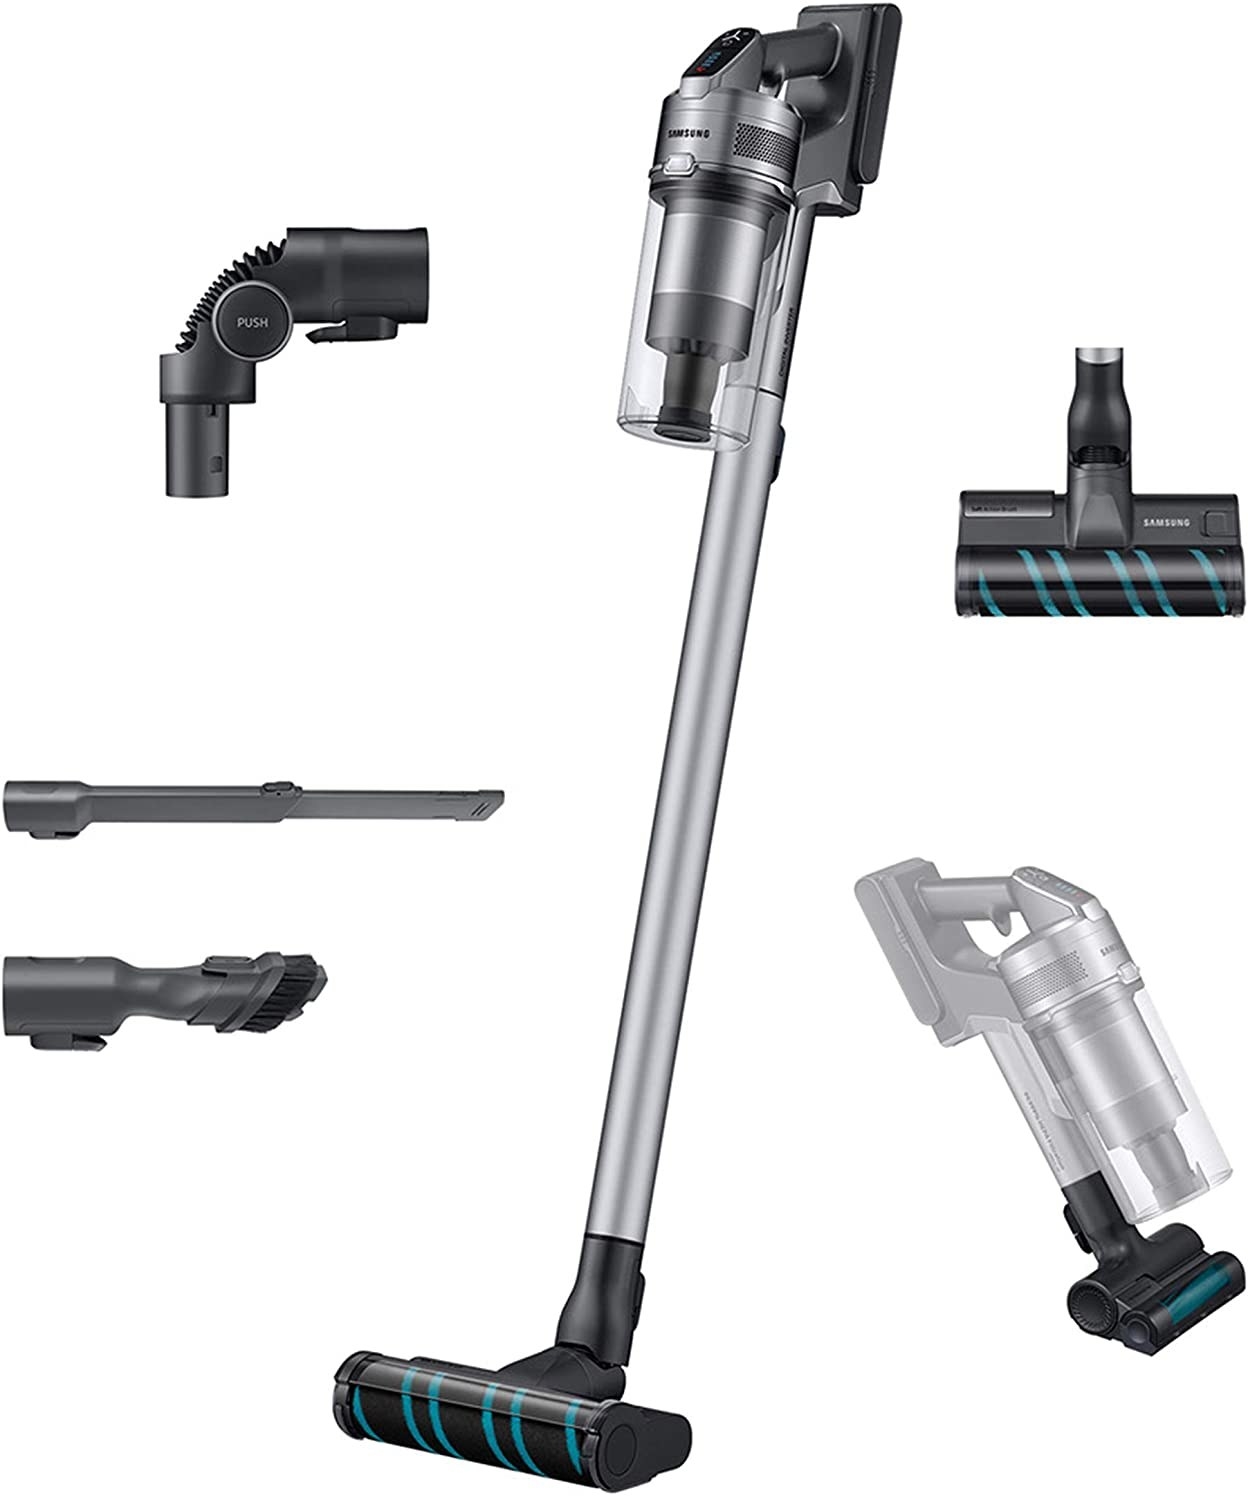 the stick vacuum with various accessories